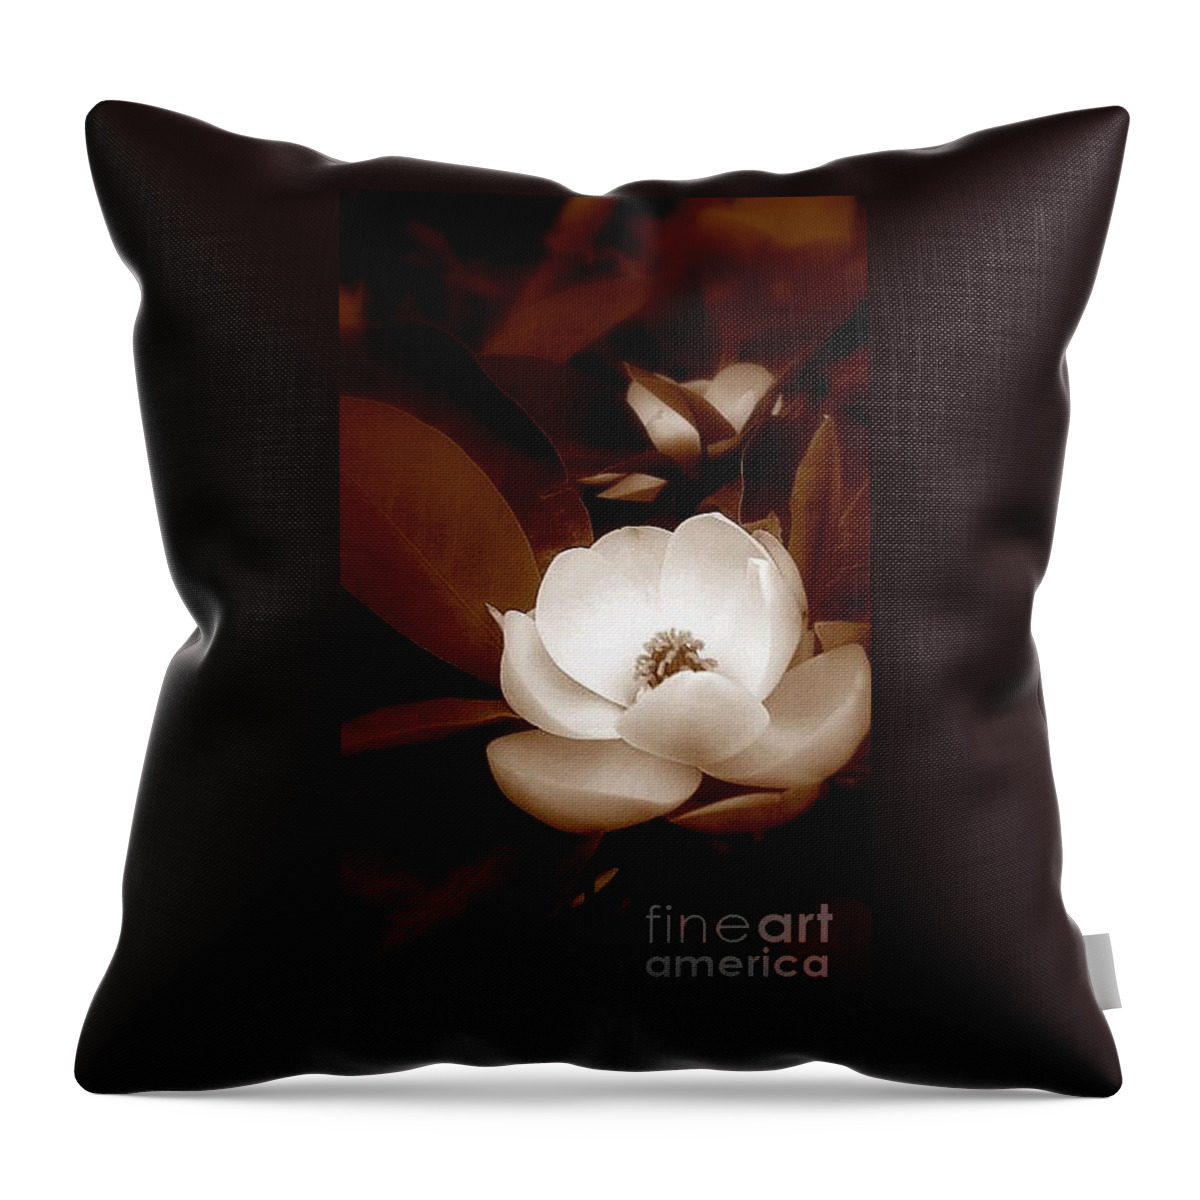 New Orleans Throw Pillow featuring the photograph New Orleans Magnolia Beauty by Michael Hoard